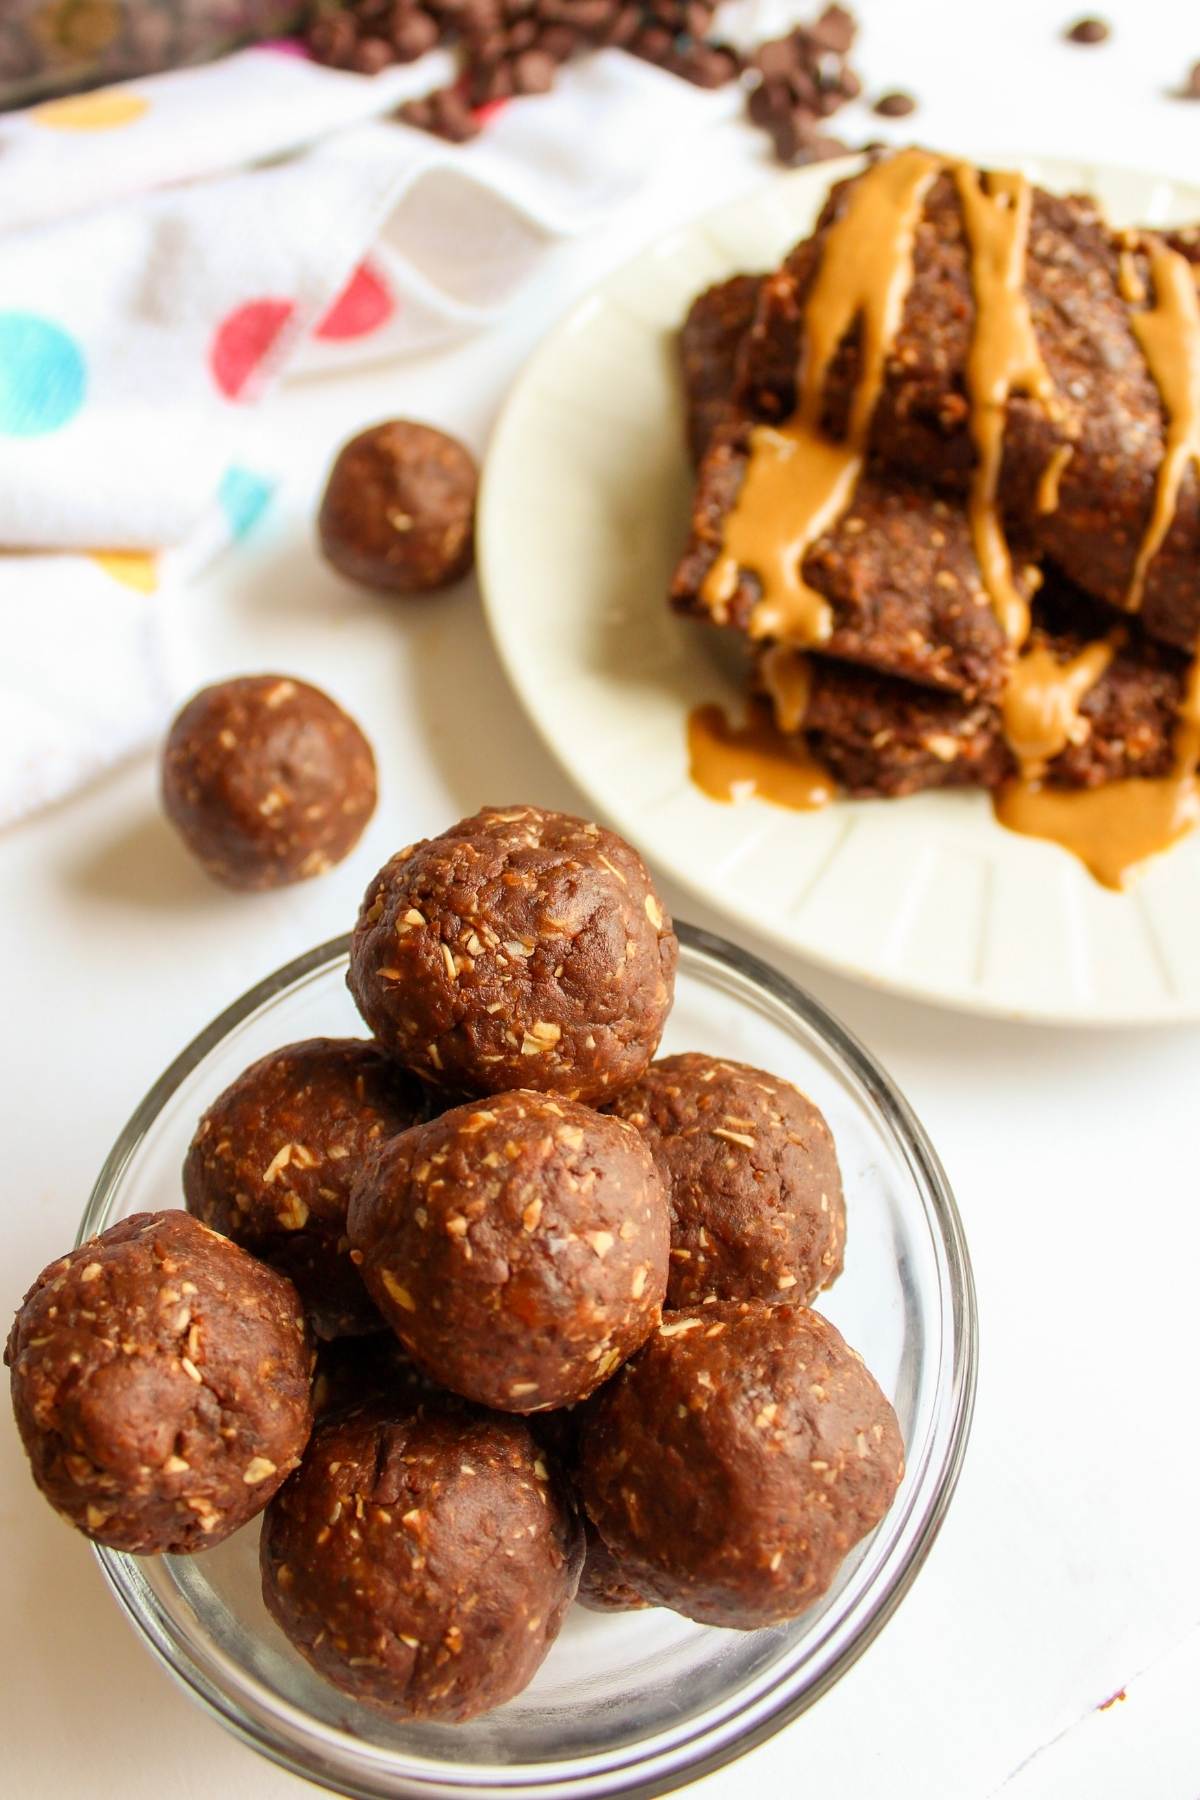 Date energy balls in a small glass serving bowl